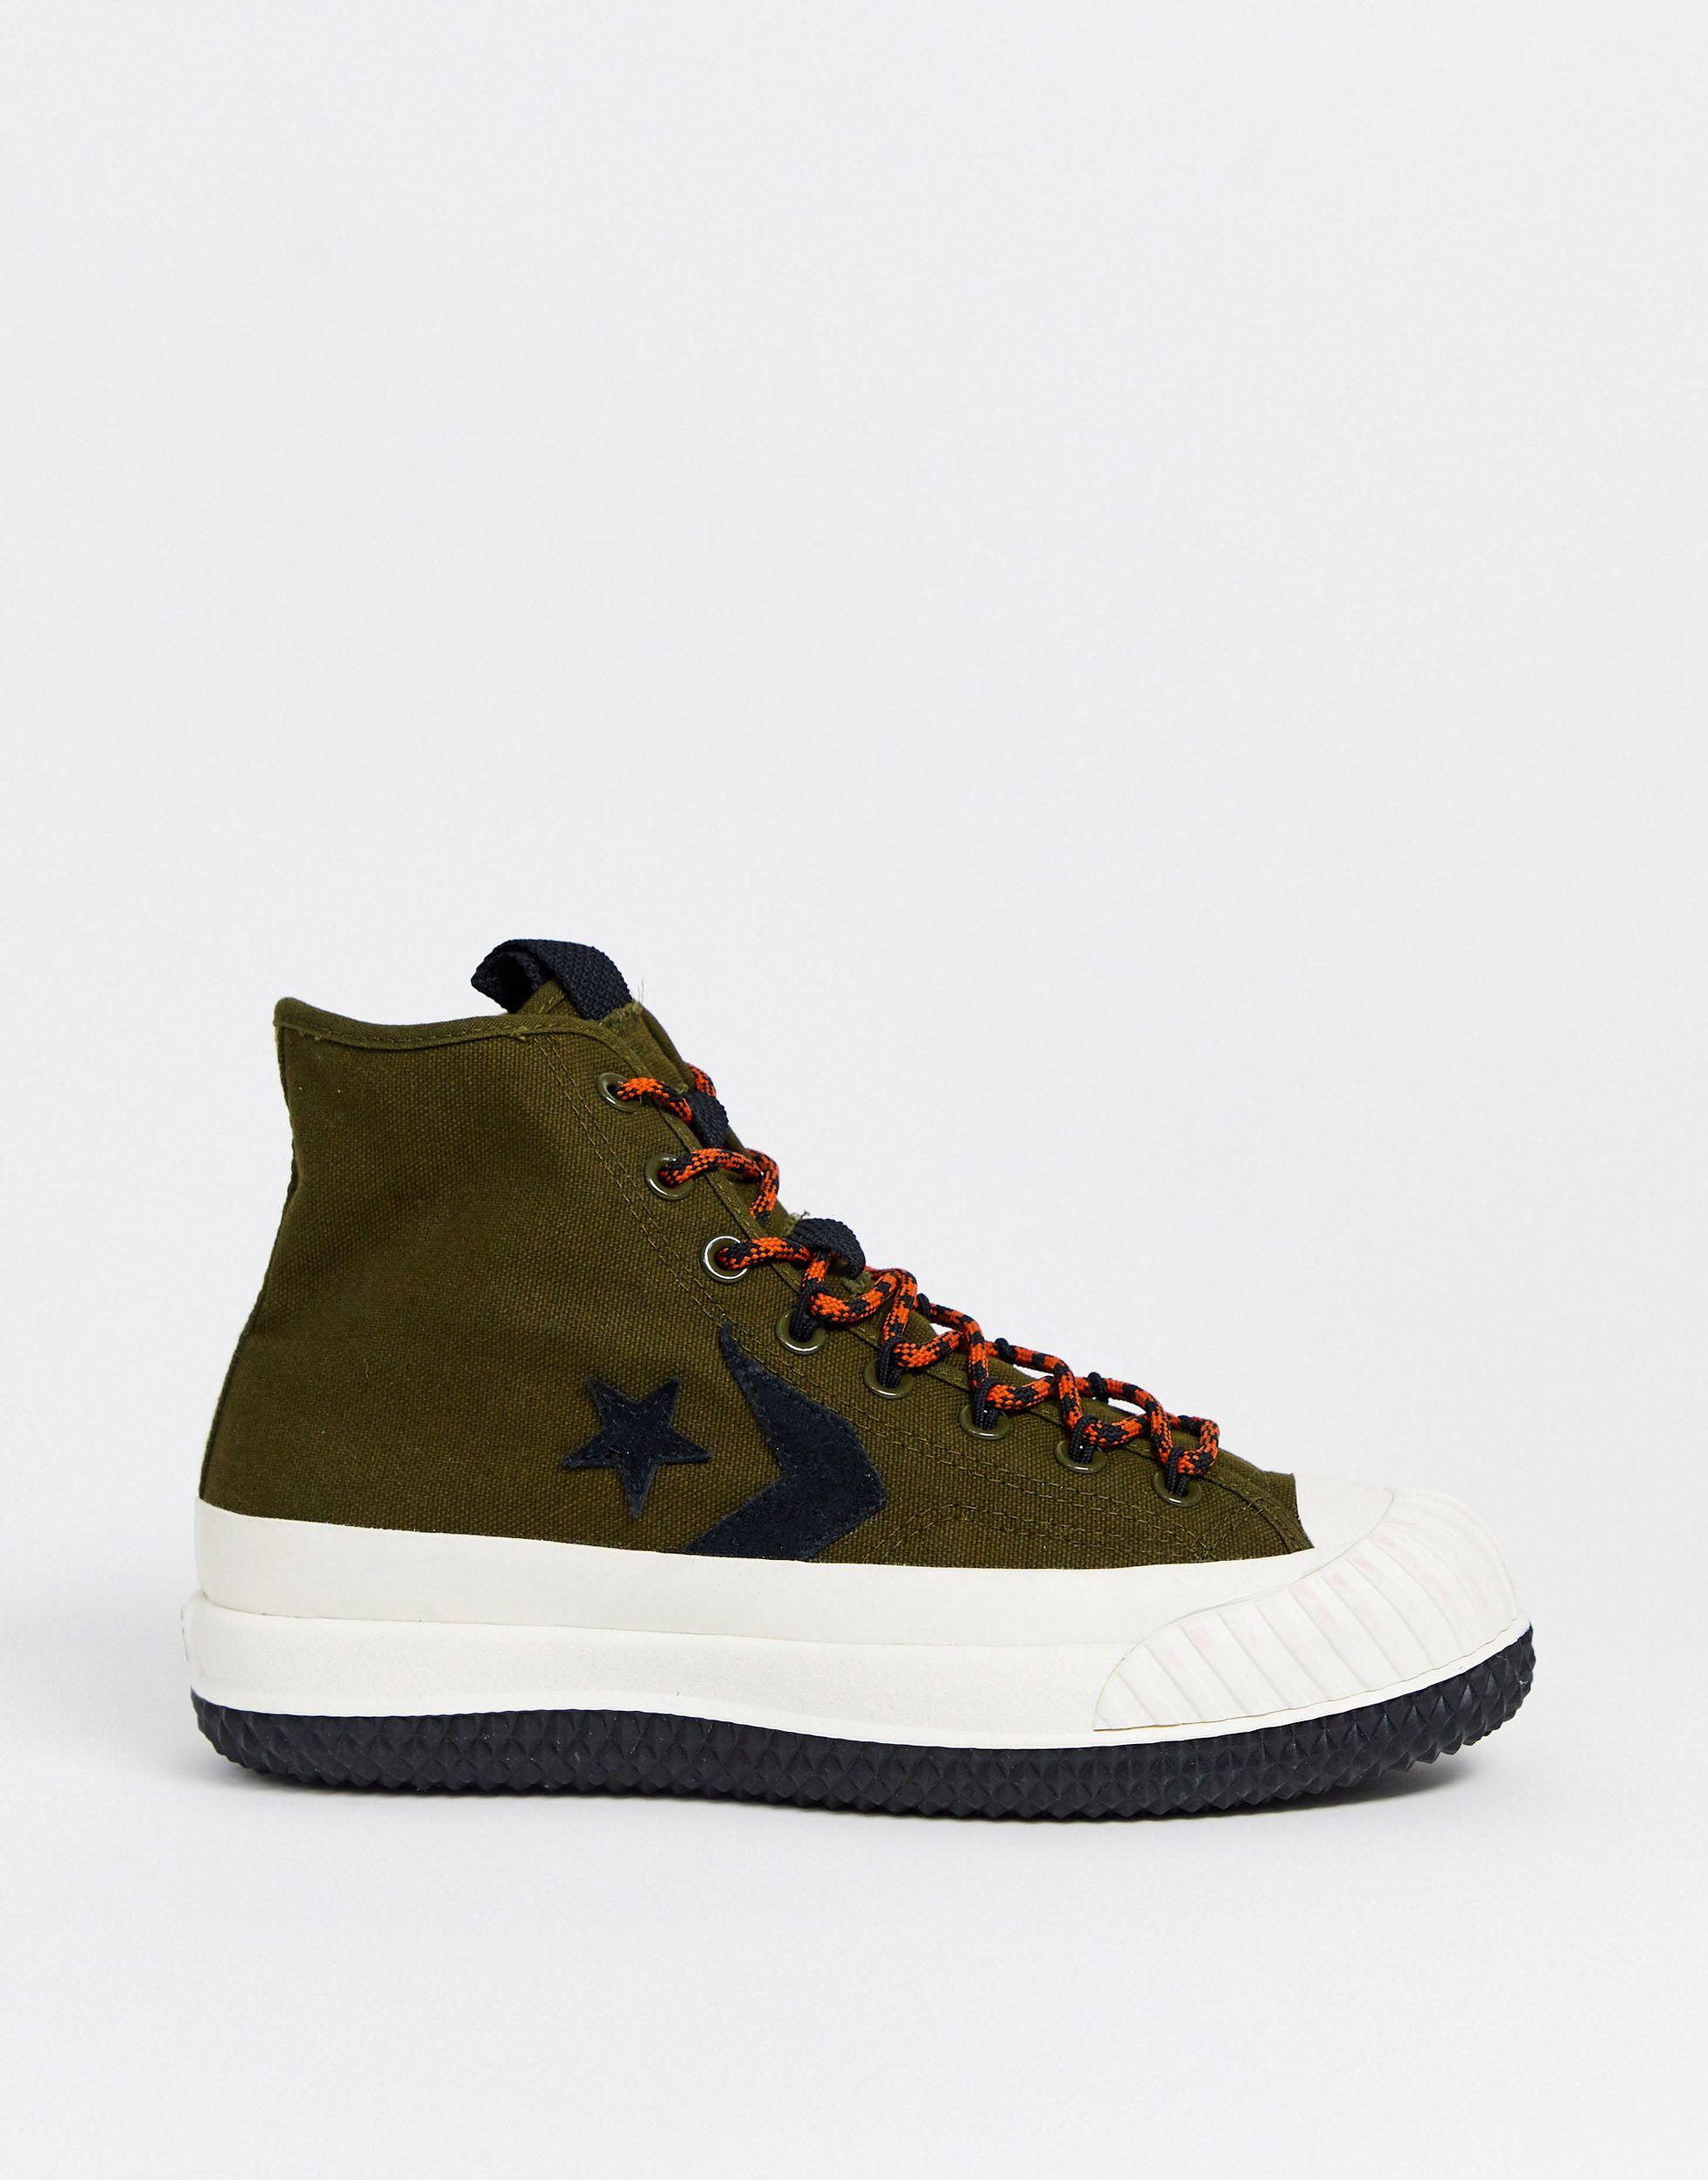 Converse Rubber Bosey Mc Boot Trainers for Men - Lyst